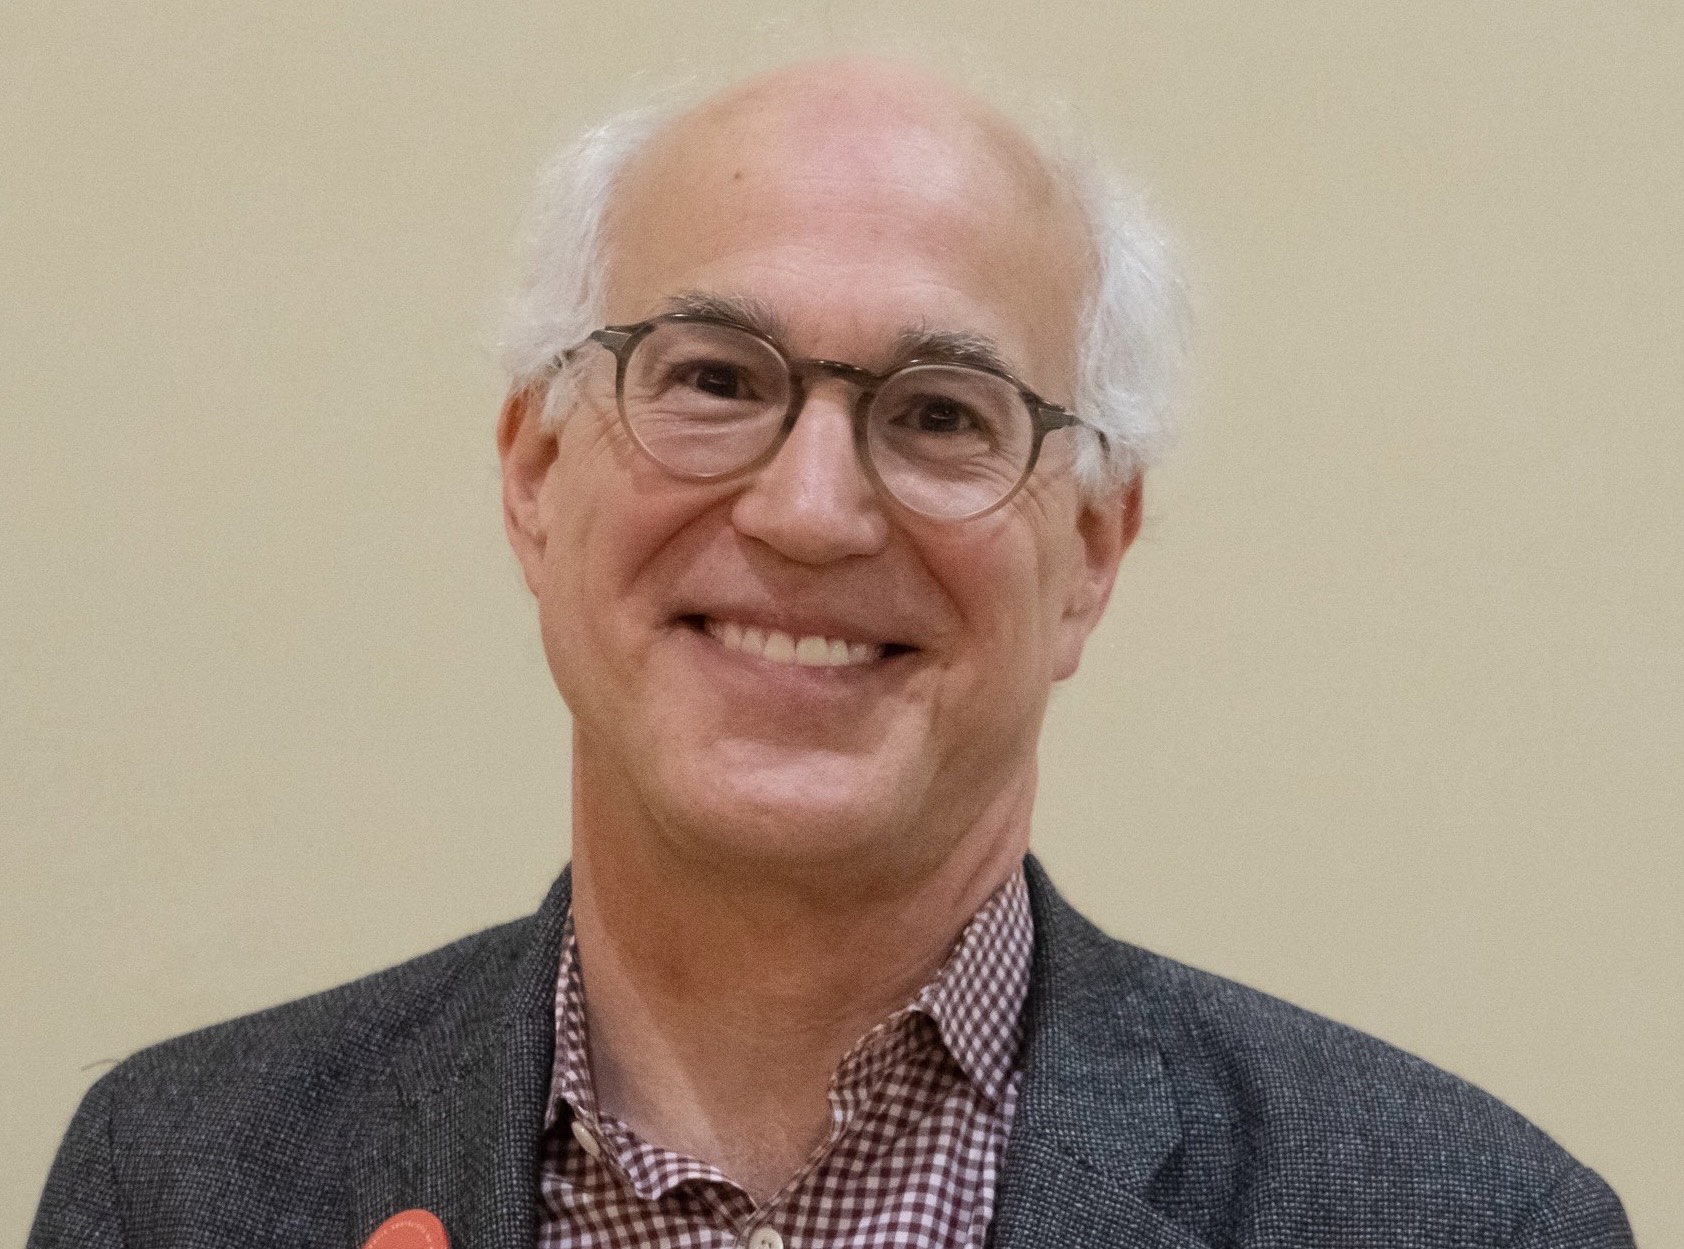 Bespectacled smiling white man with white hair.